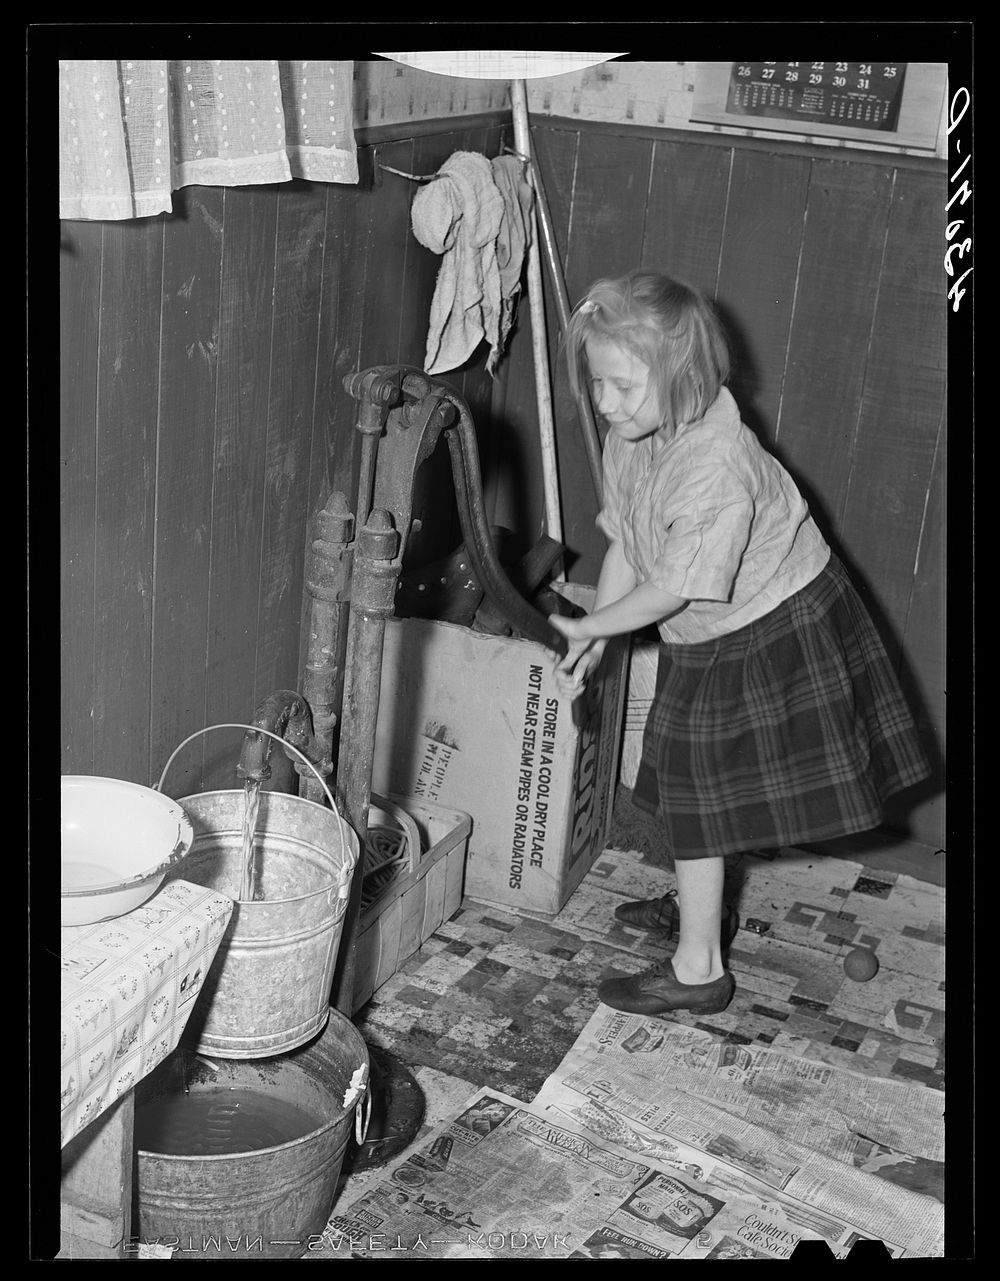 [Untitled photo, possibly related to: Daughter of a worker at the Pittsburgh Crucible Steel Corporation of Midland…